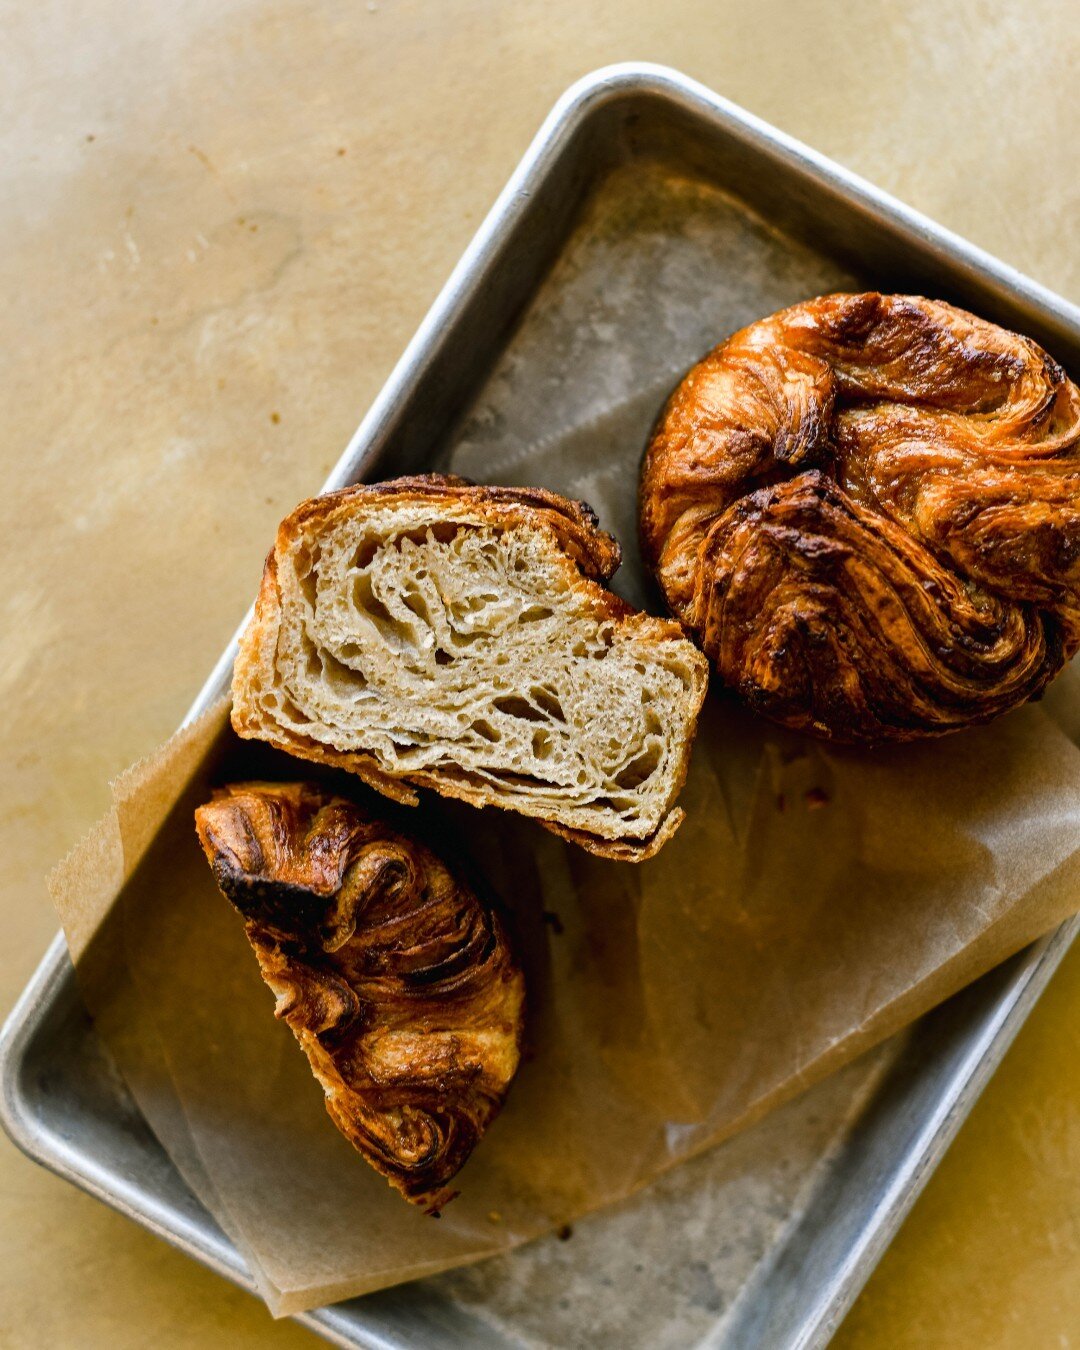 The classic kouign amann is a laminated and leavened pastry akin to croissants and danishes, only with sugar laminated into the layers. The best part is that the bottoms caramelize when baked, giving the little pastry a rich flavor.